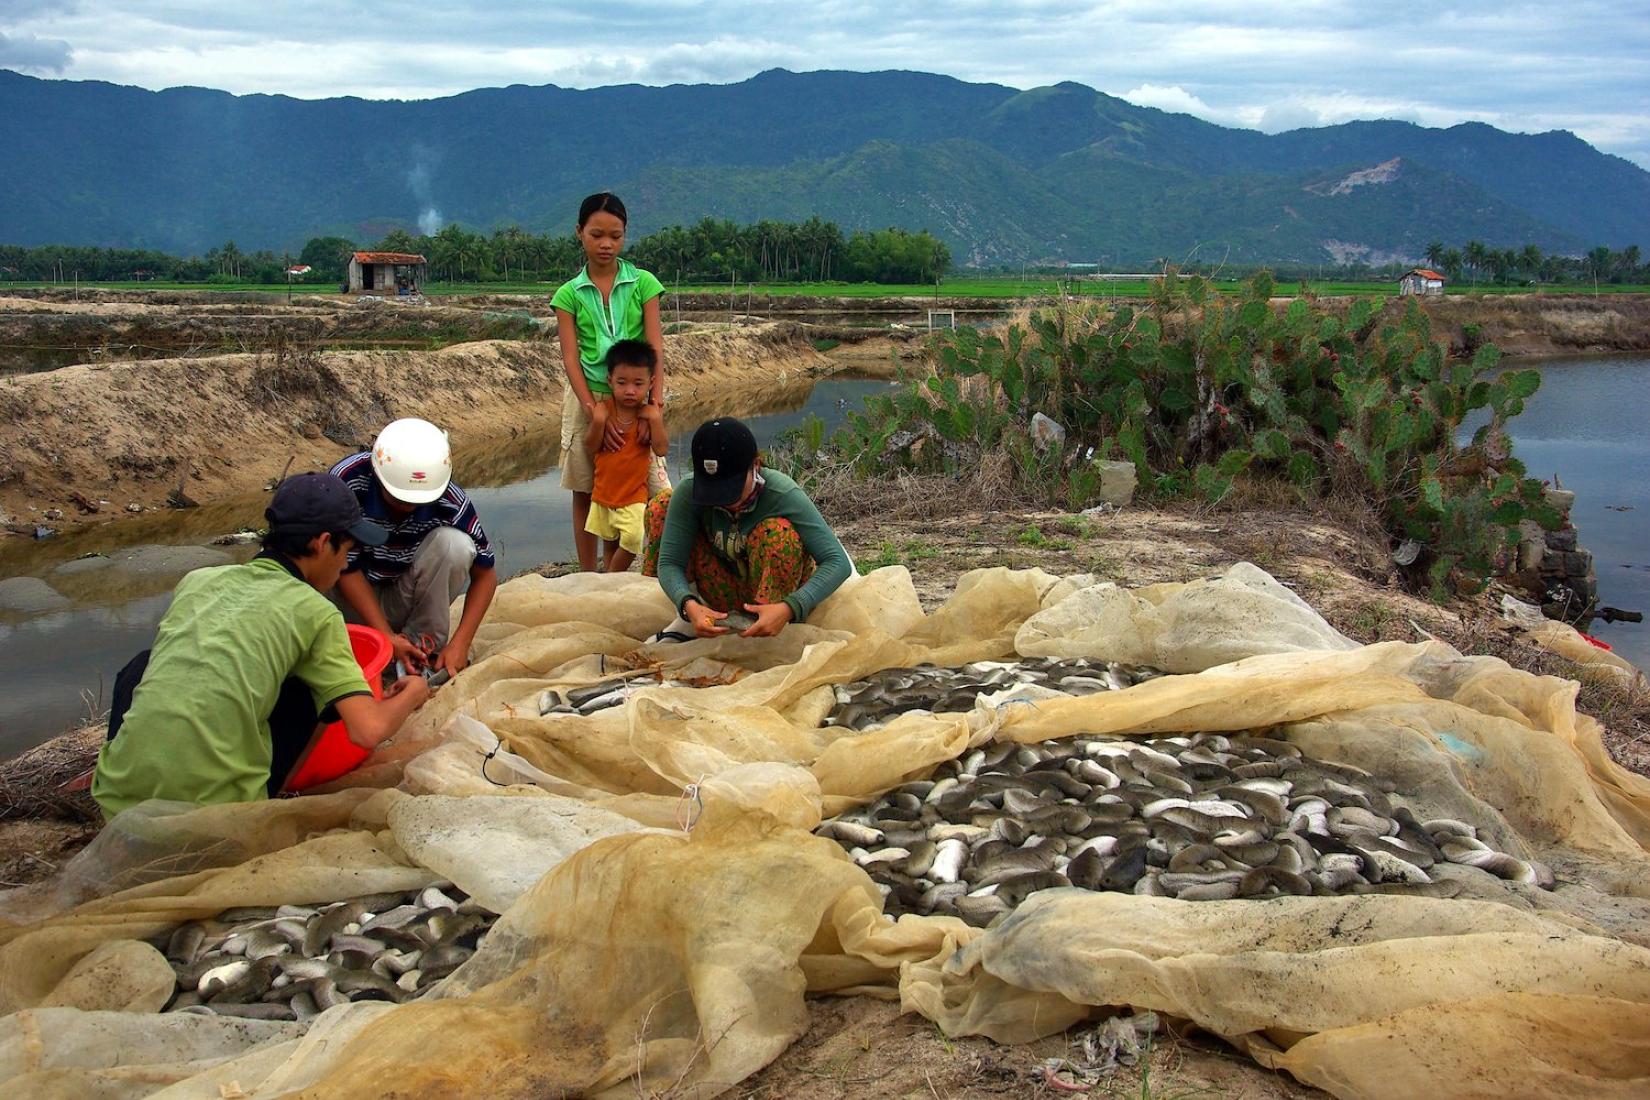 Three people inspecting a large net containing sea cucumbers with two children watching on